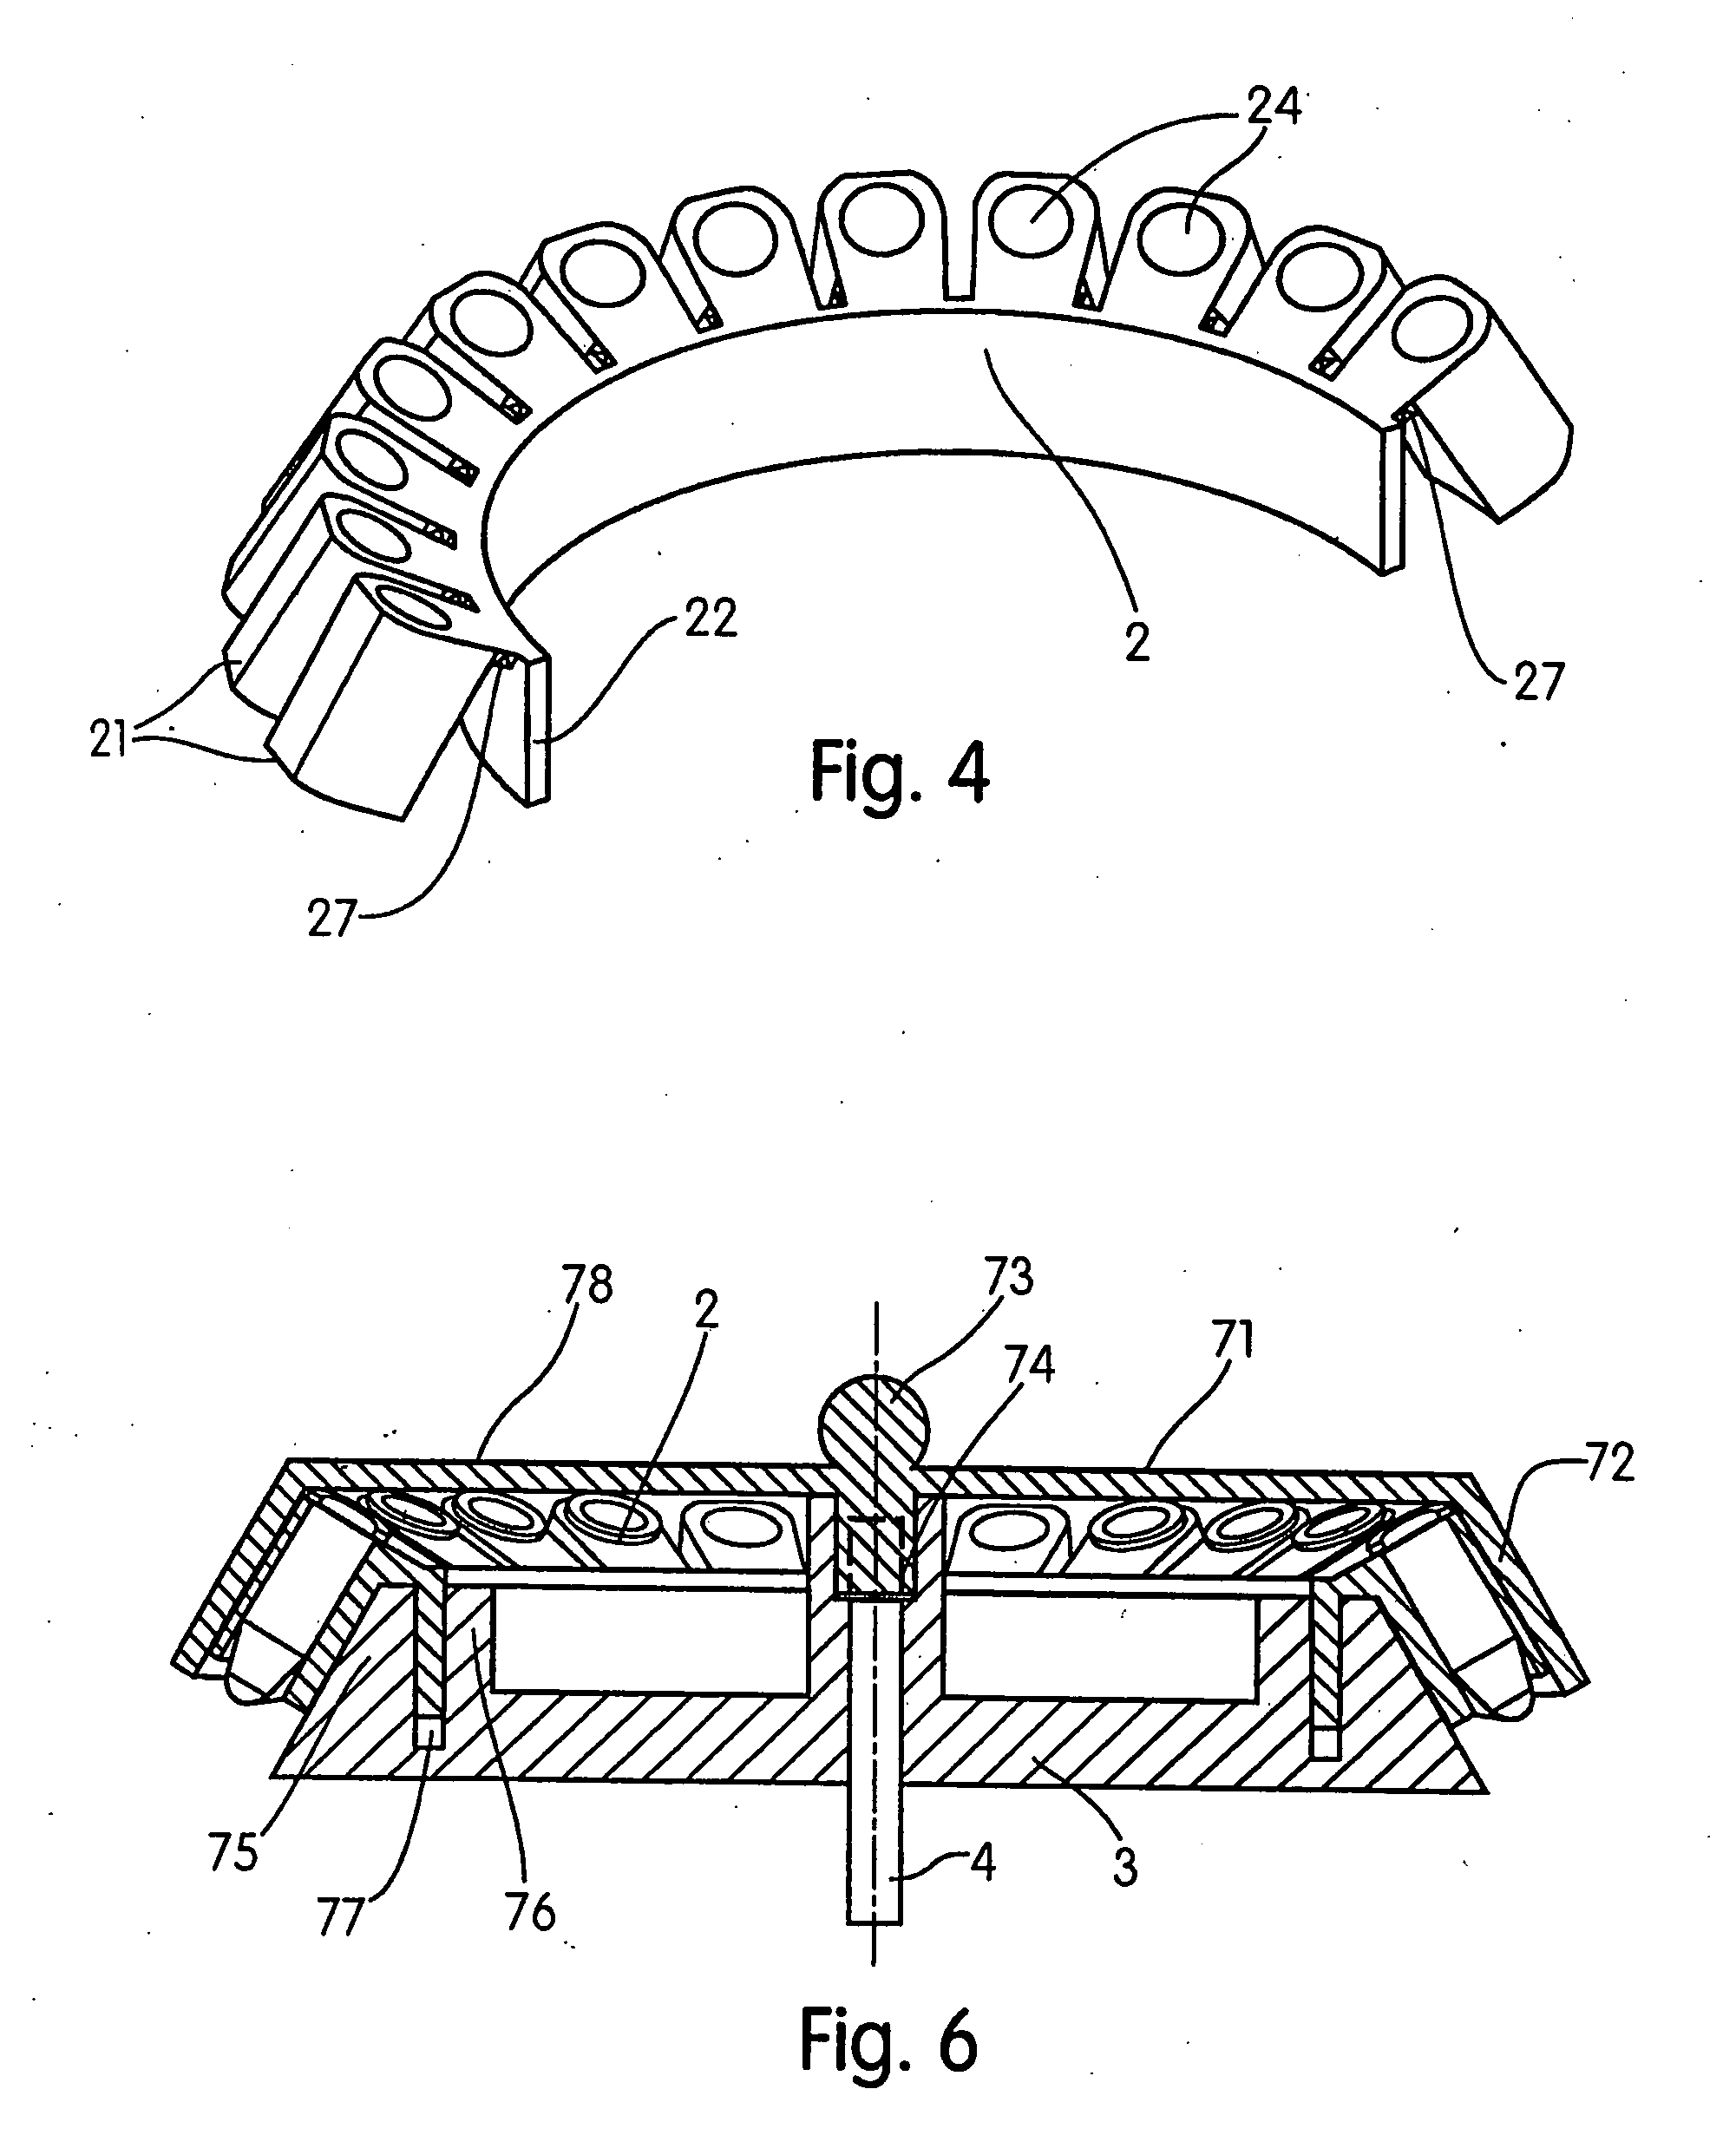 System for transferance of test tubes from tube rack to centrifuge rotor